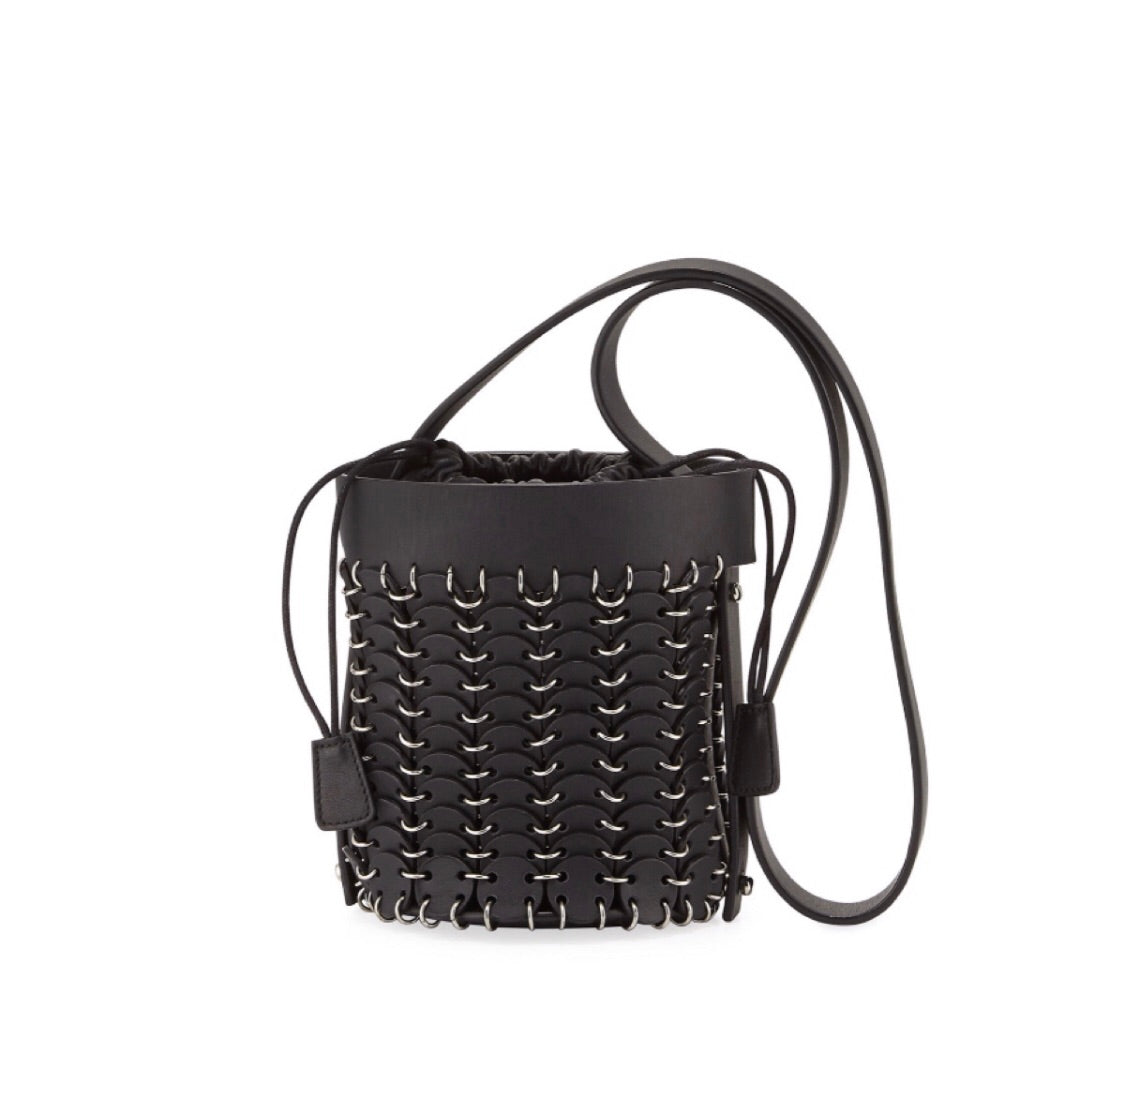 The Chain Link Leather Crossbody Black